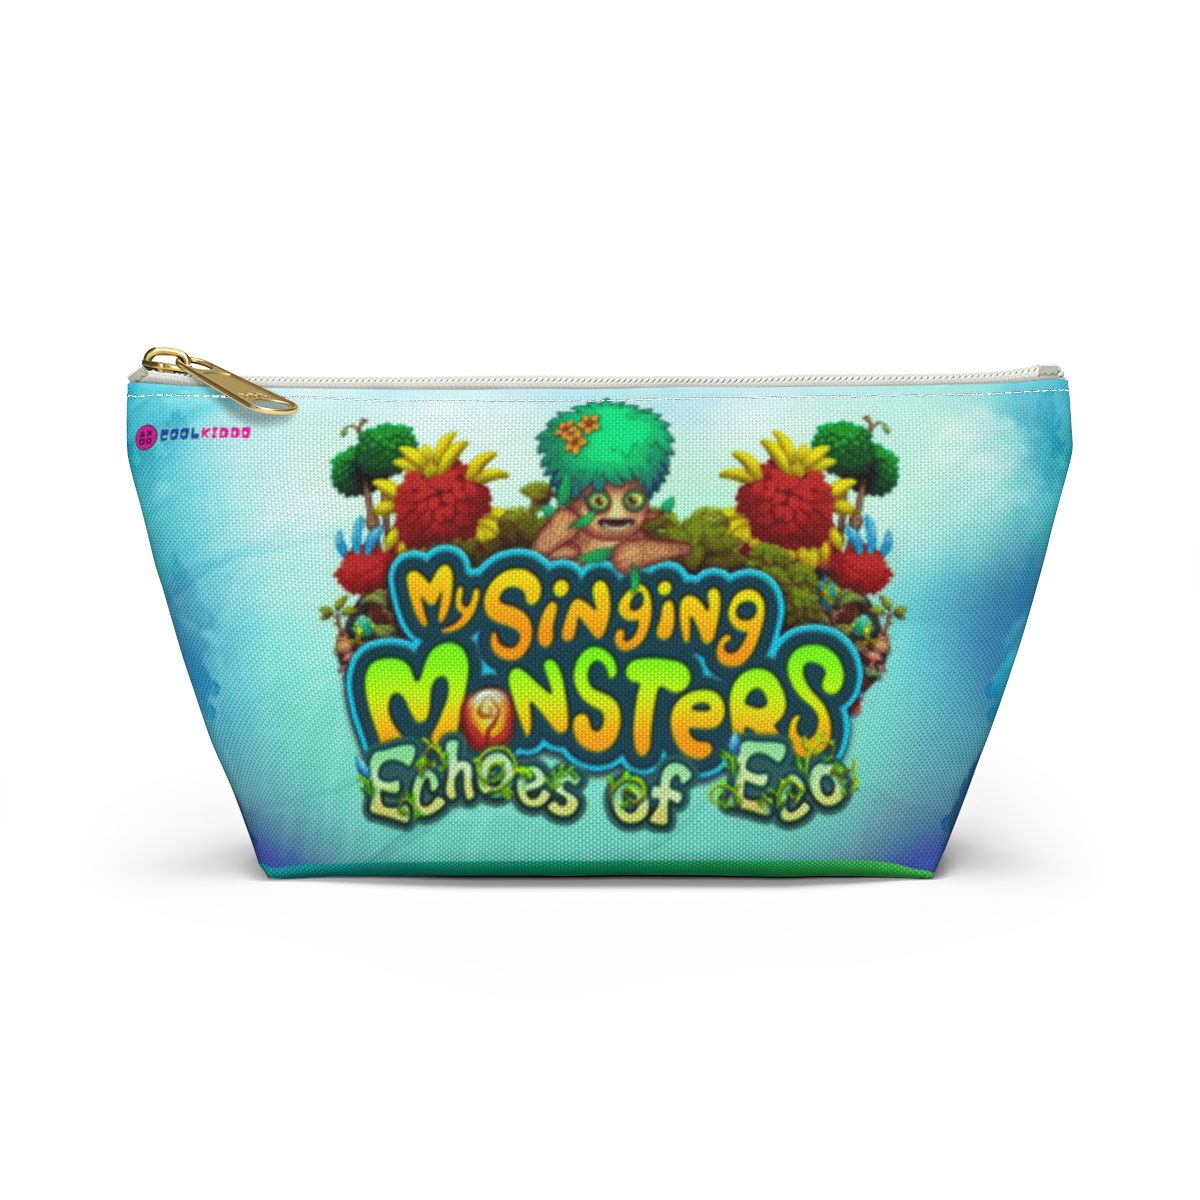 My Singing Monsters Echoes of Eco Pencil Pouch Cool Kiddo 10